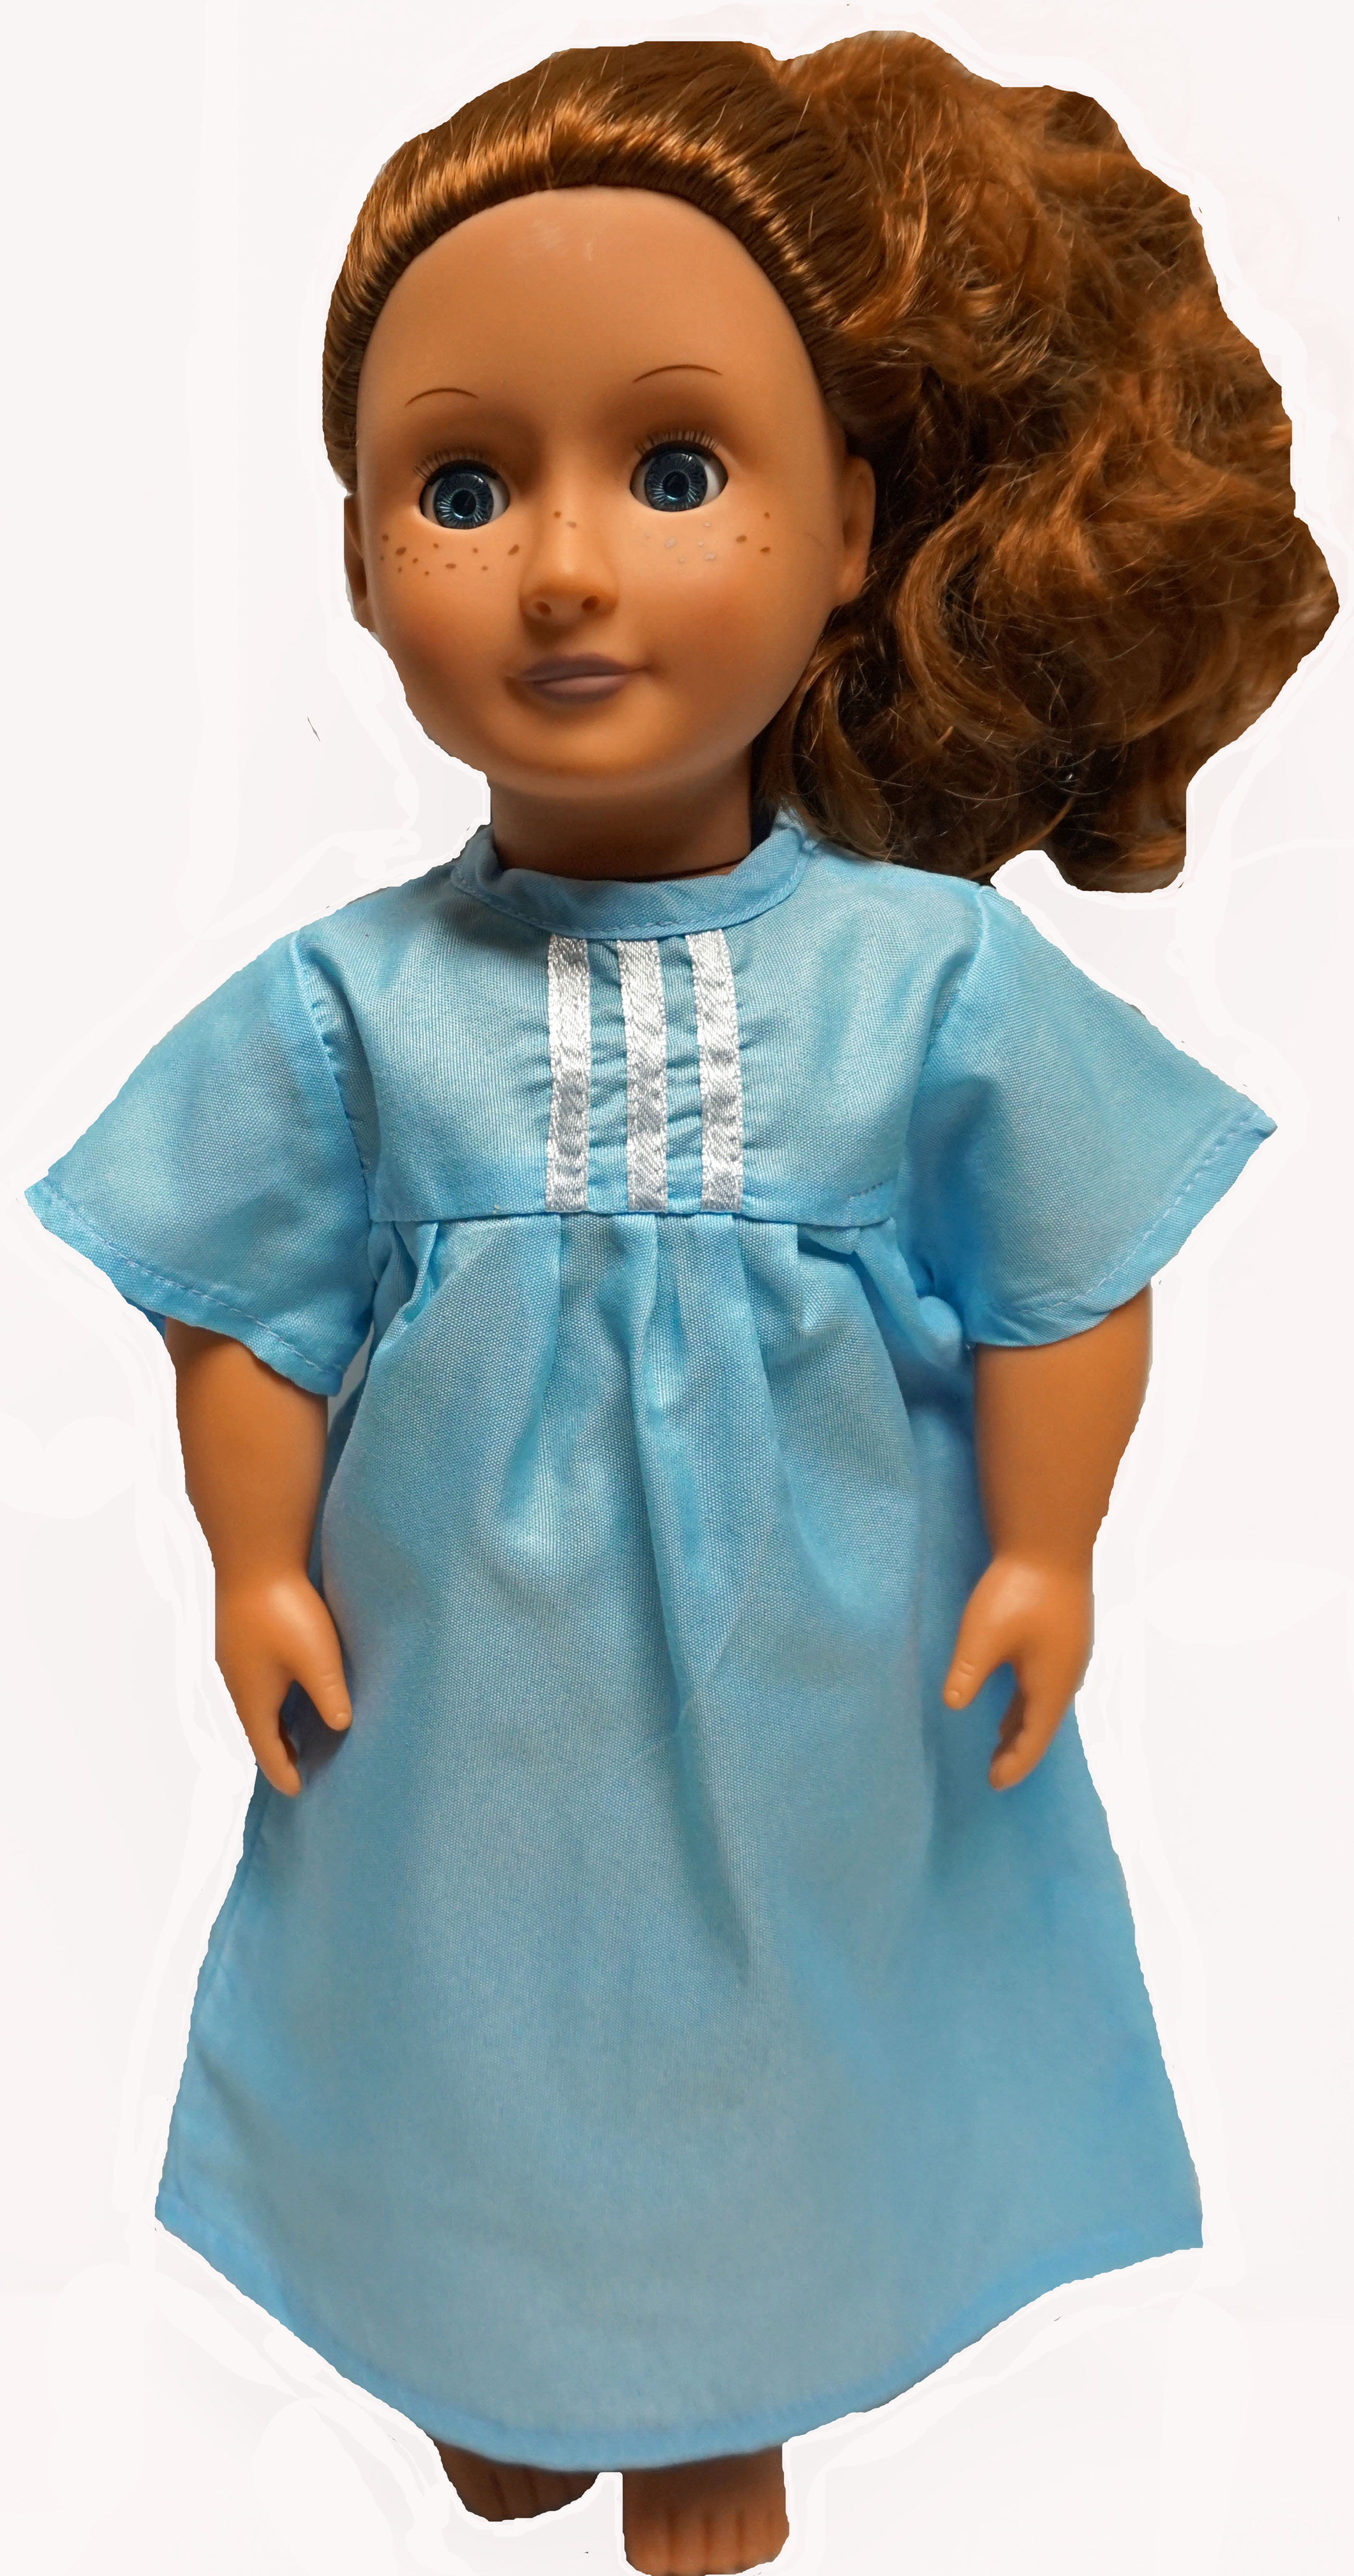 Doll Clothes Made To Fit The 16 Inch Cabbage Patch Doll No Doll! Blue Sunflower Dress and Hair Ribbon